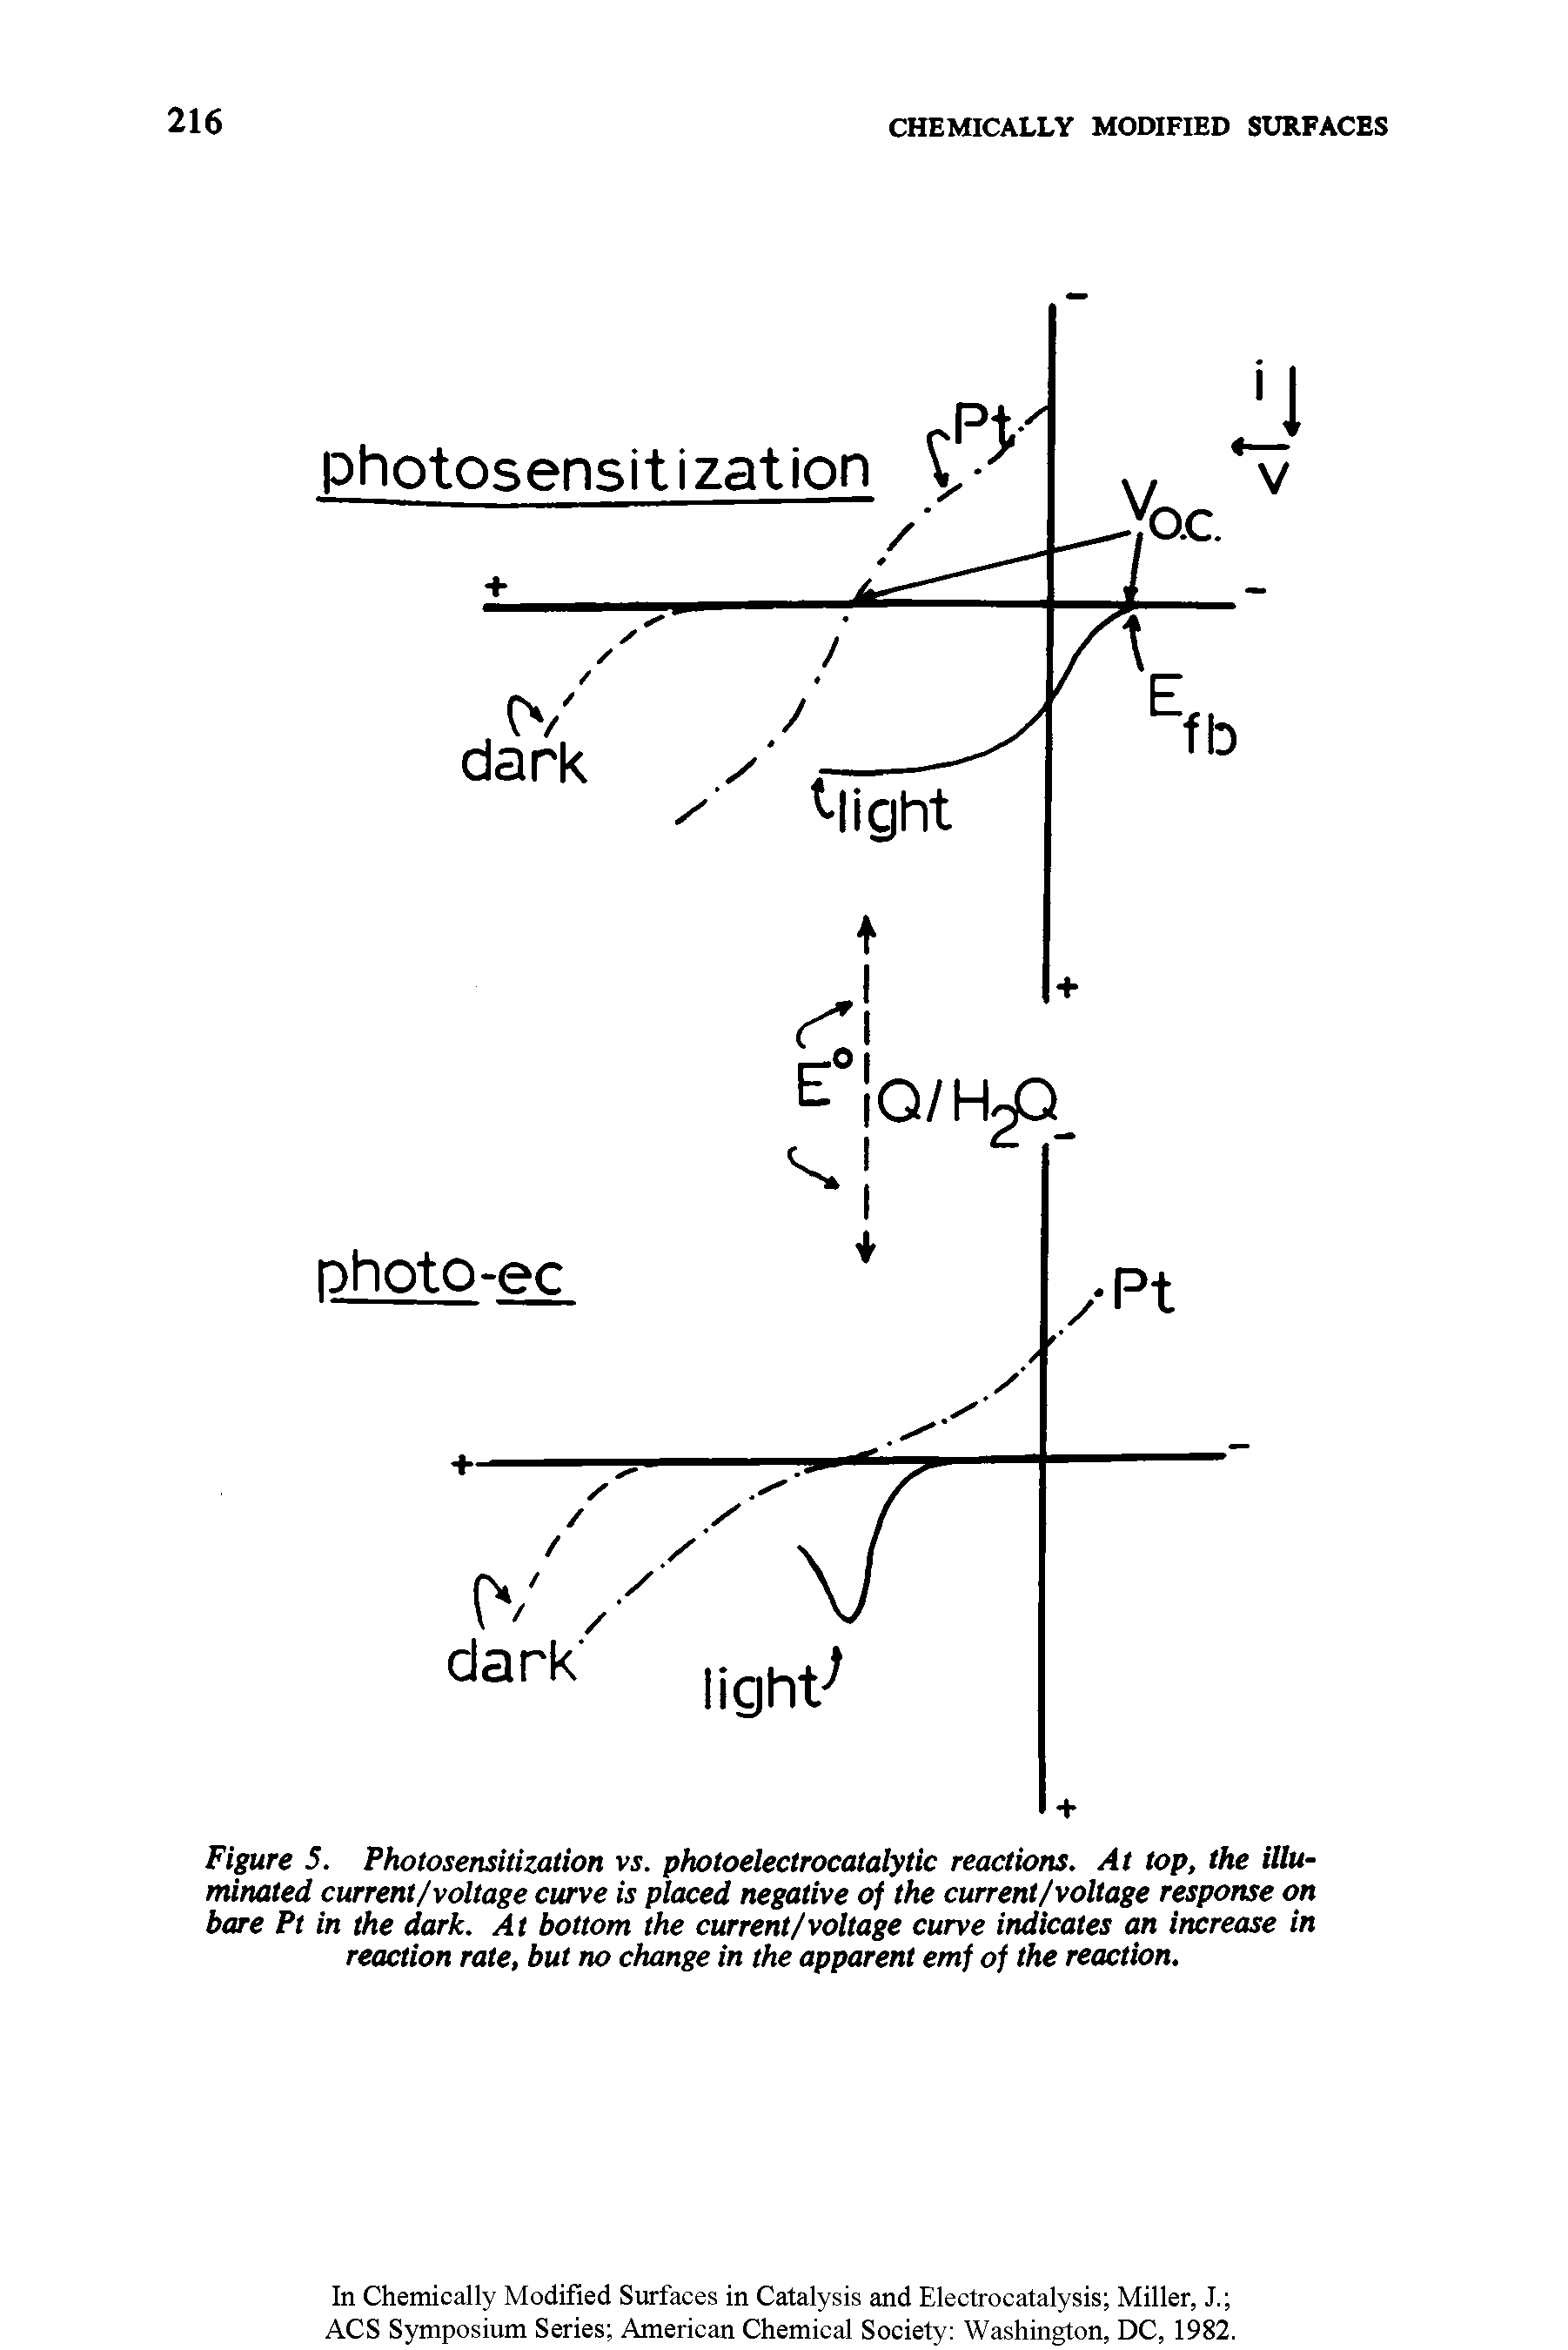 Figure 5. Photosensitization vs. photoelectrocatalytic reactions. At top, the illuminated current/voltage curve is placed negative of the current/voltage response on bare Pt in the dark. At bottom the current/voltage curve indicates an increase in reaction rate, but no change in the apparent emf of the reaction.